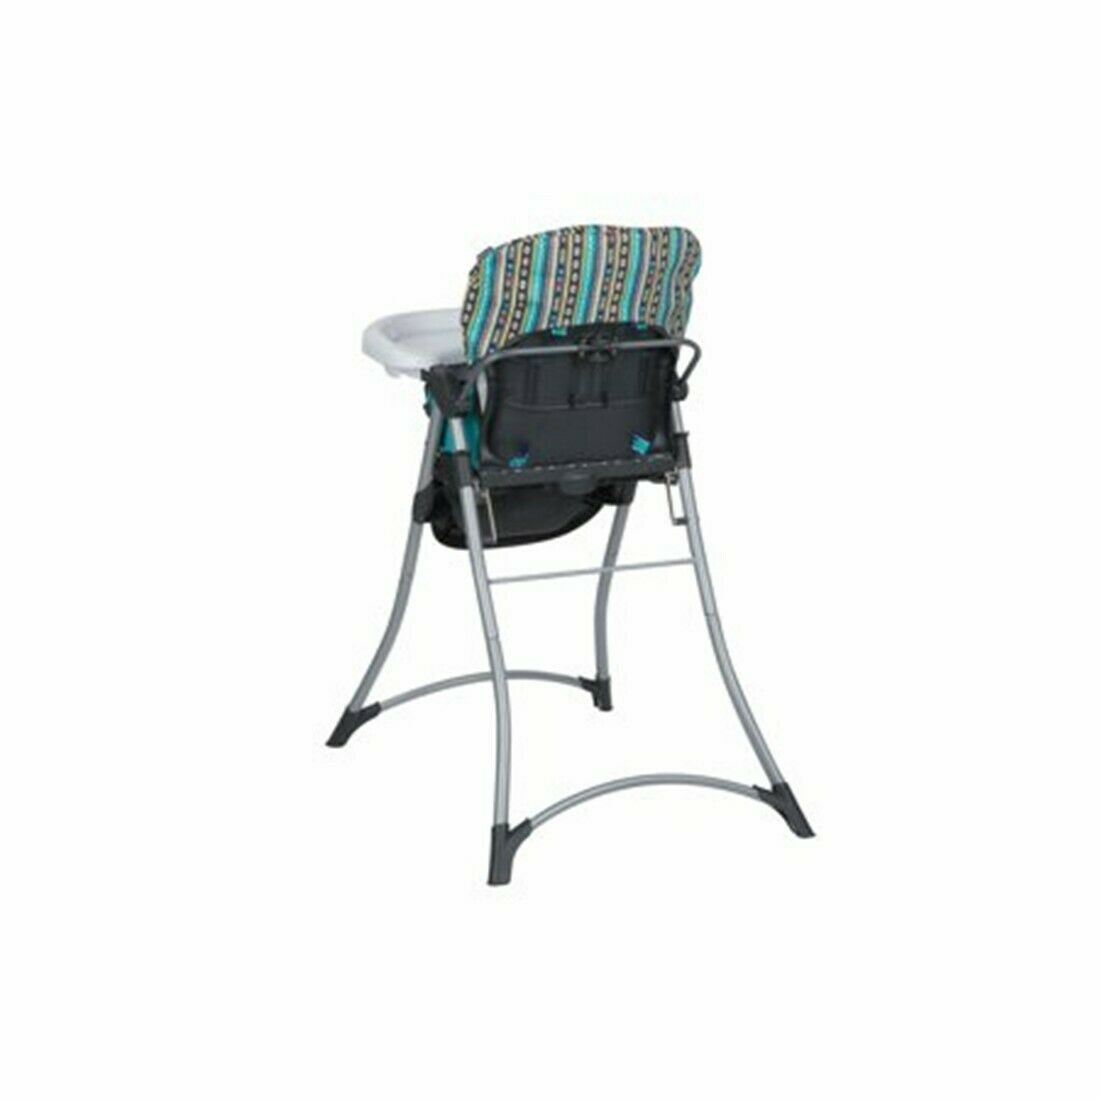 Baby Stroller with Car Seat Travel System Infant Chair Bassinet Playard Combo